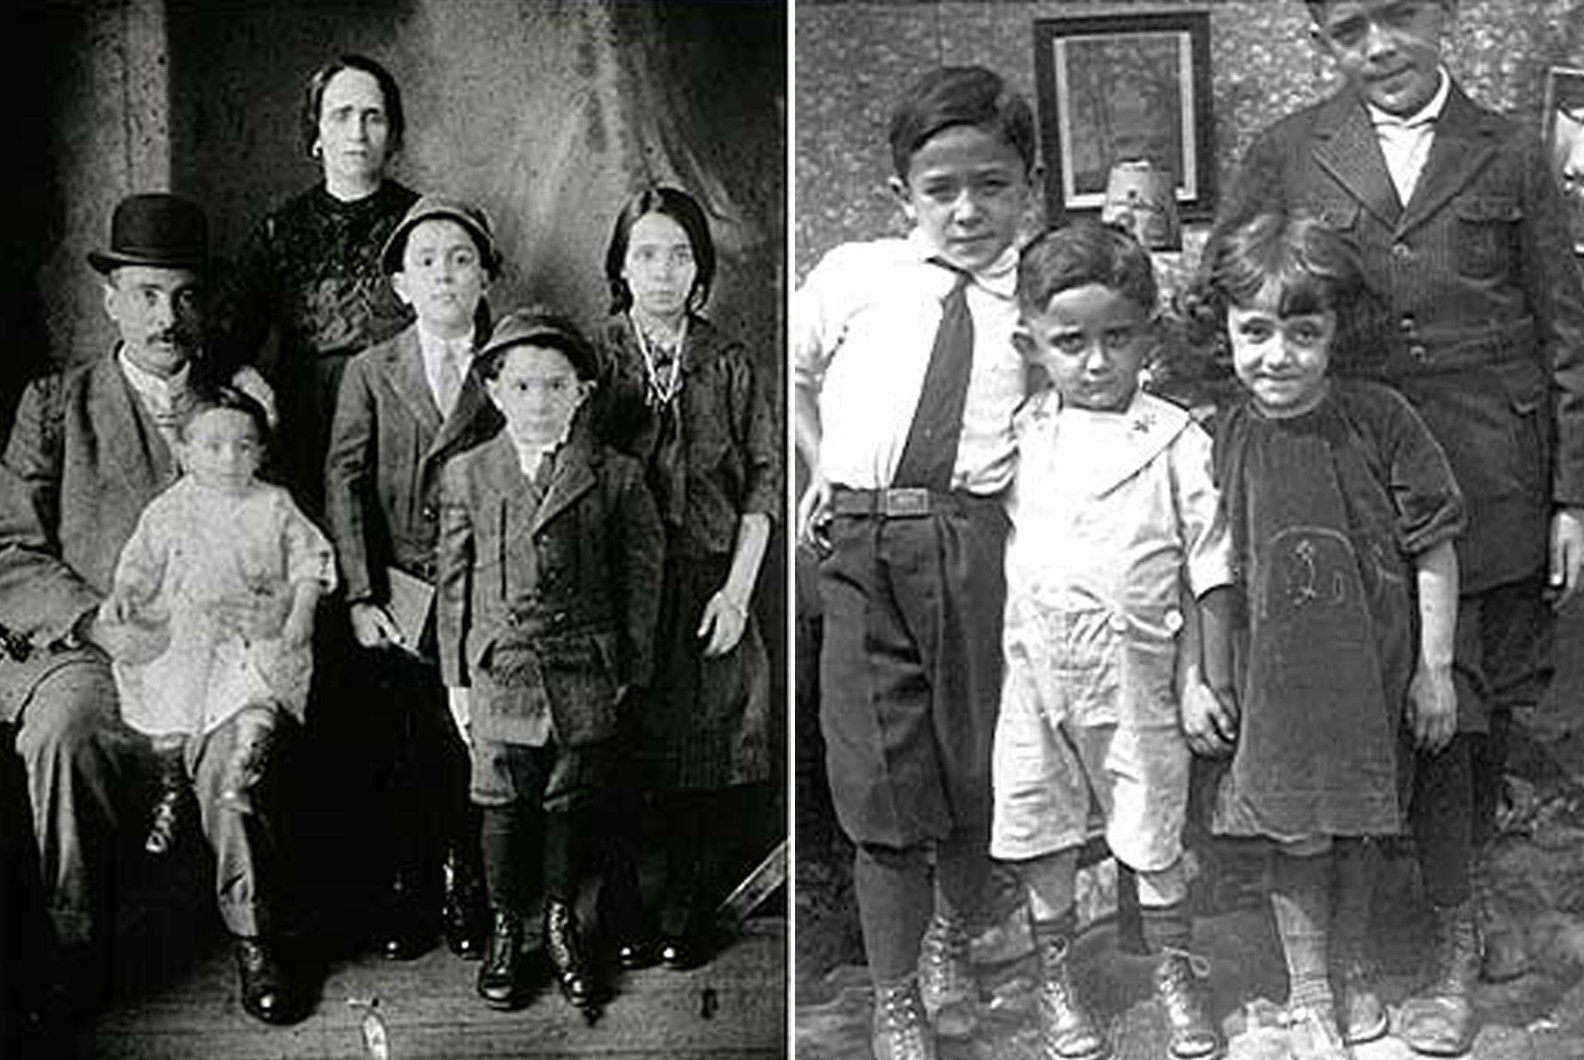 2 black and white portraits. (Left) 6 members of the Confino family, 2 adults and 4 children. (Right) 4 young children.